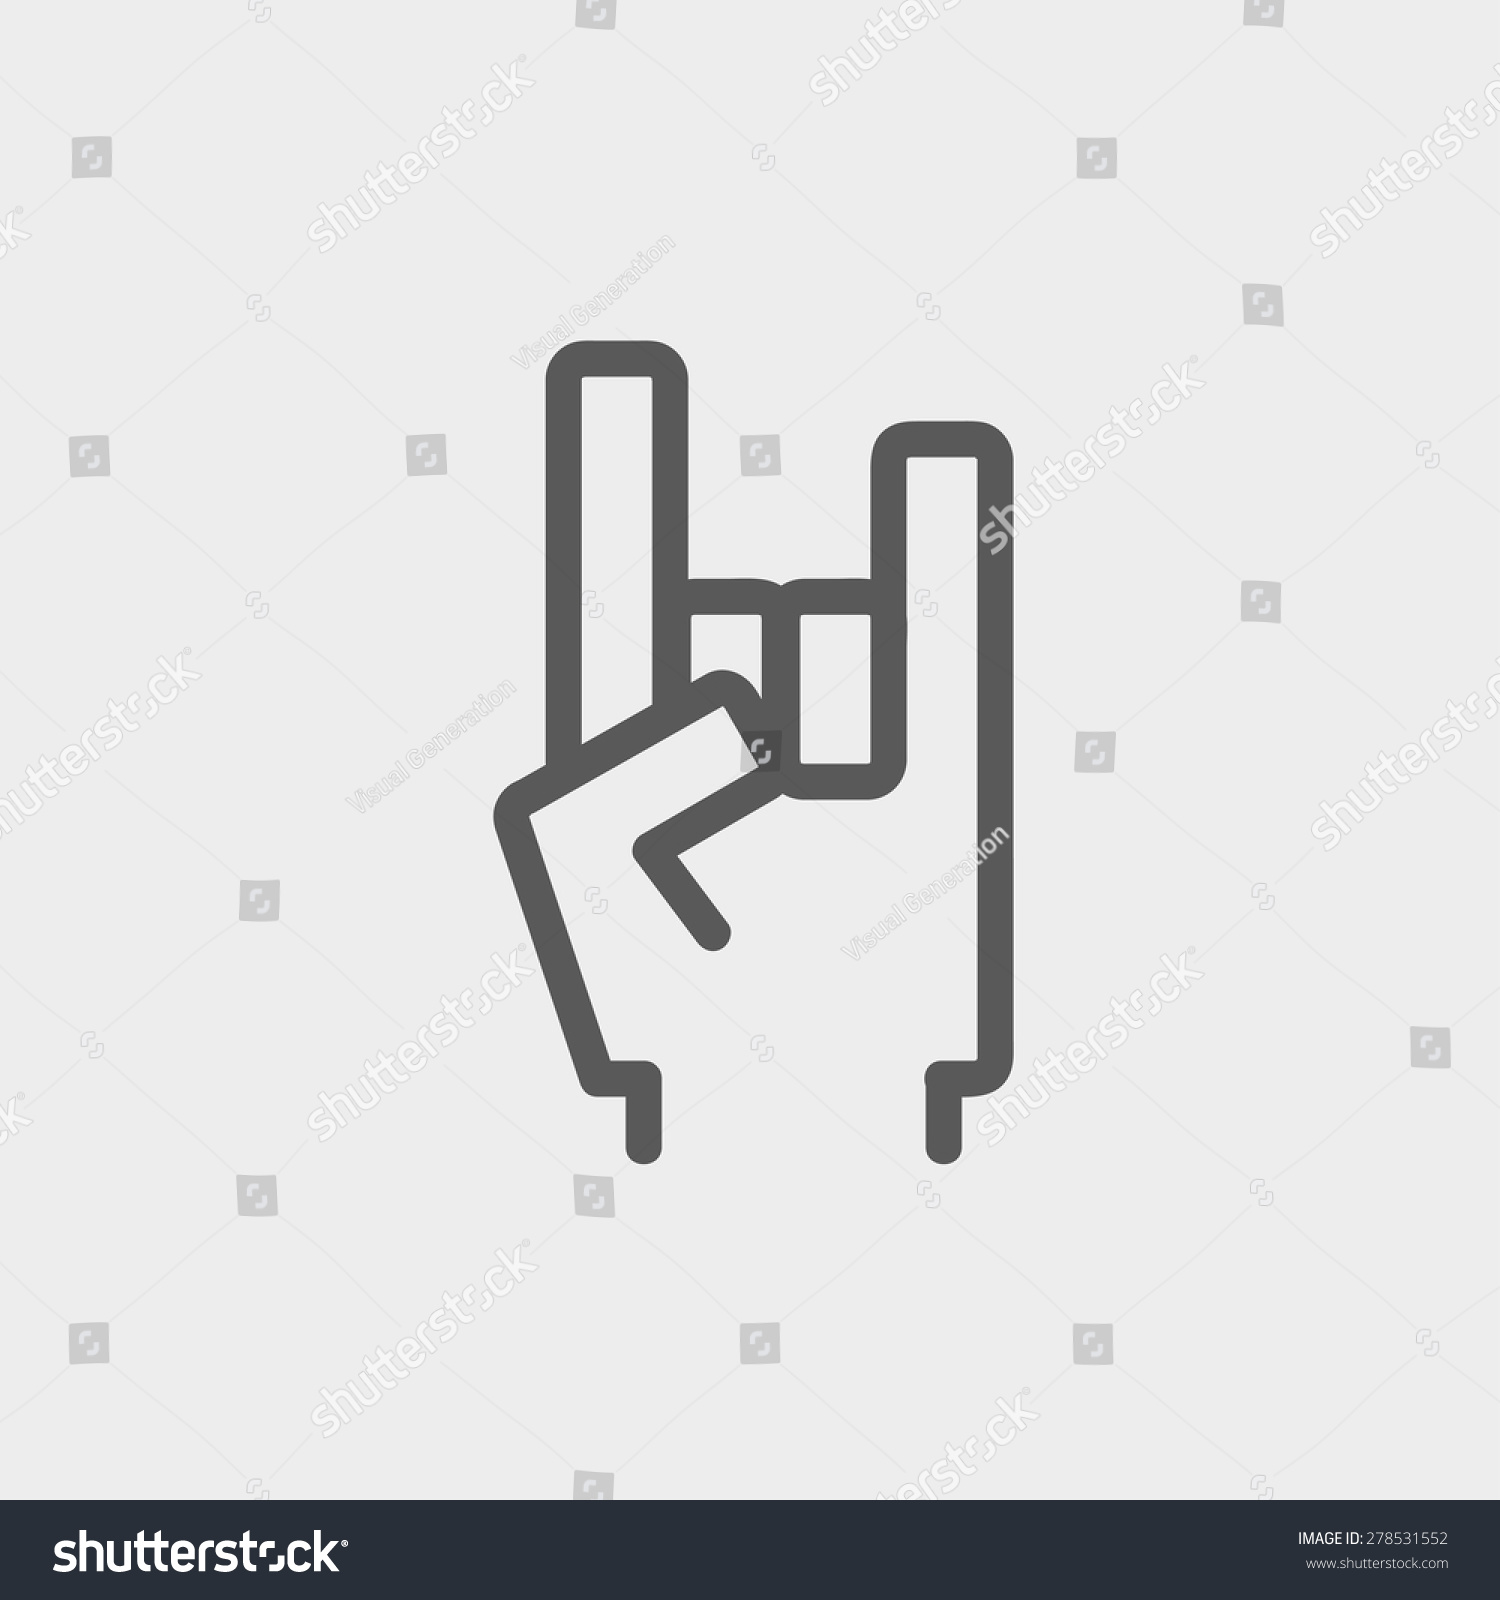 Rock And Roll Hand Gesture Minimal Wallpapers